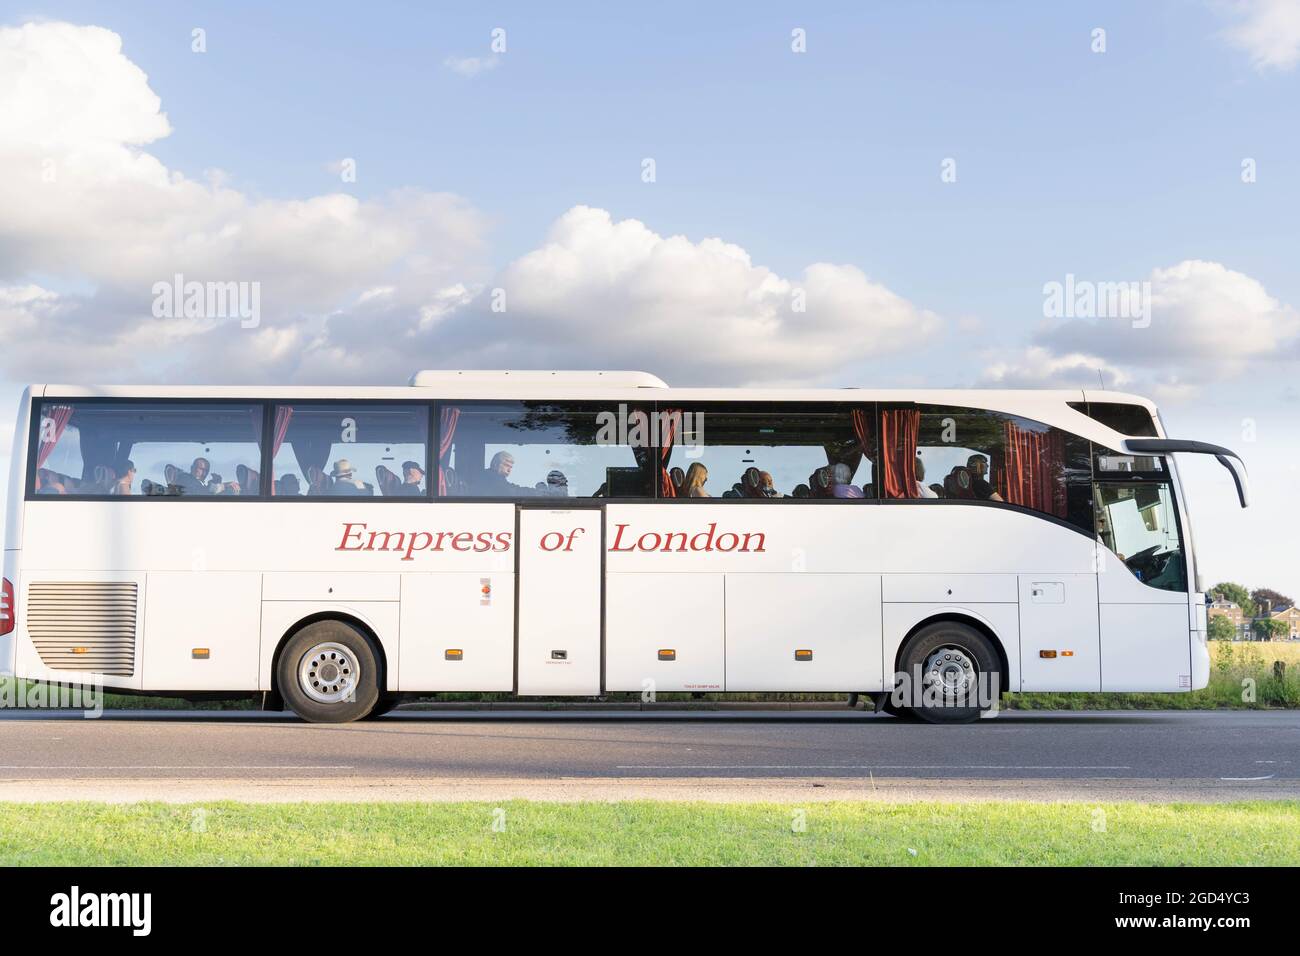 Tourist Coach High Resolution Stock Photography and Images - Alamy